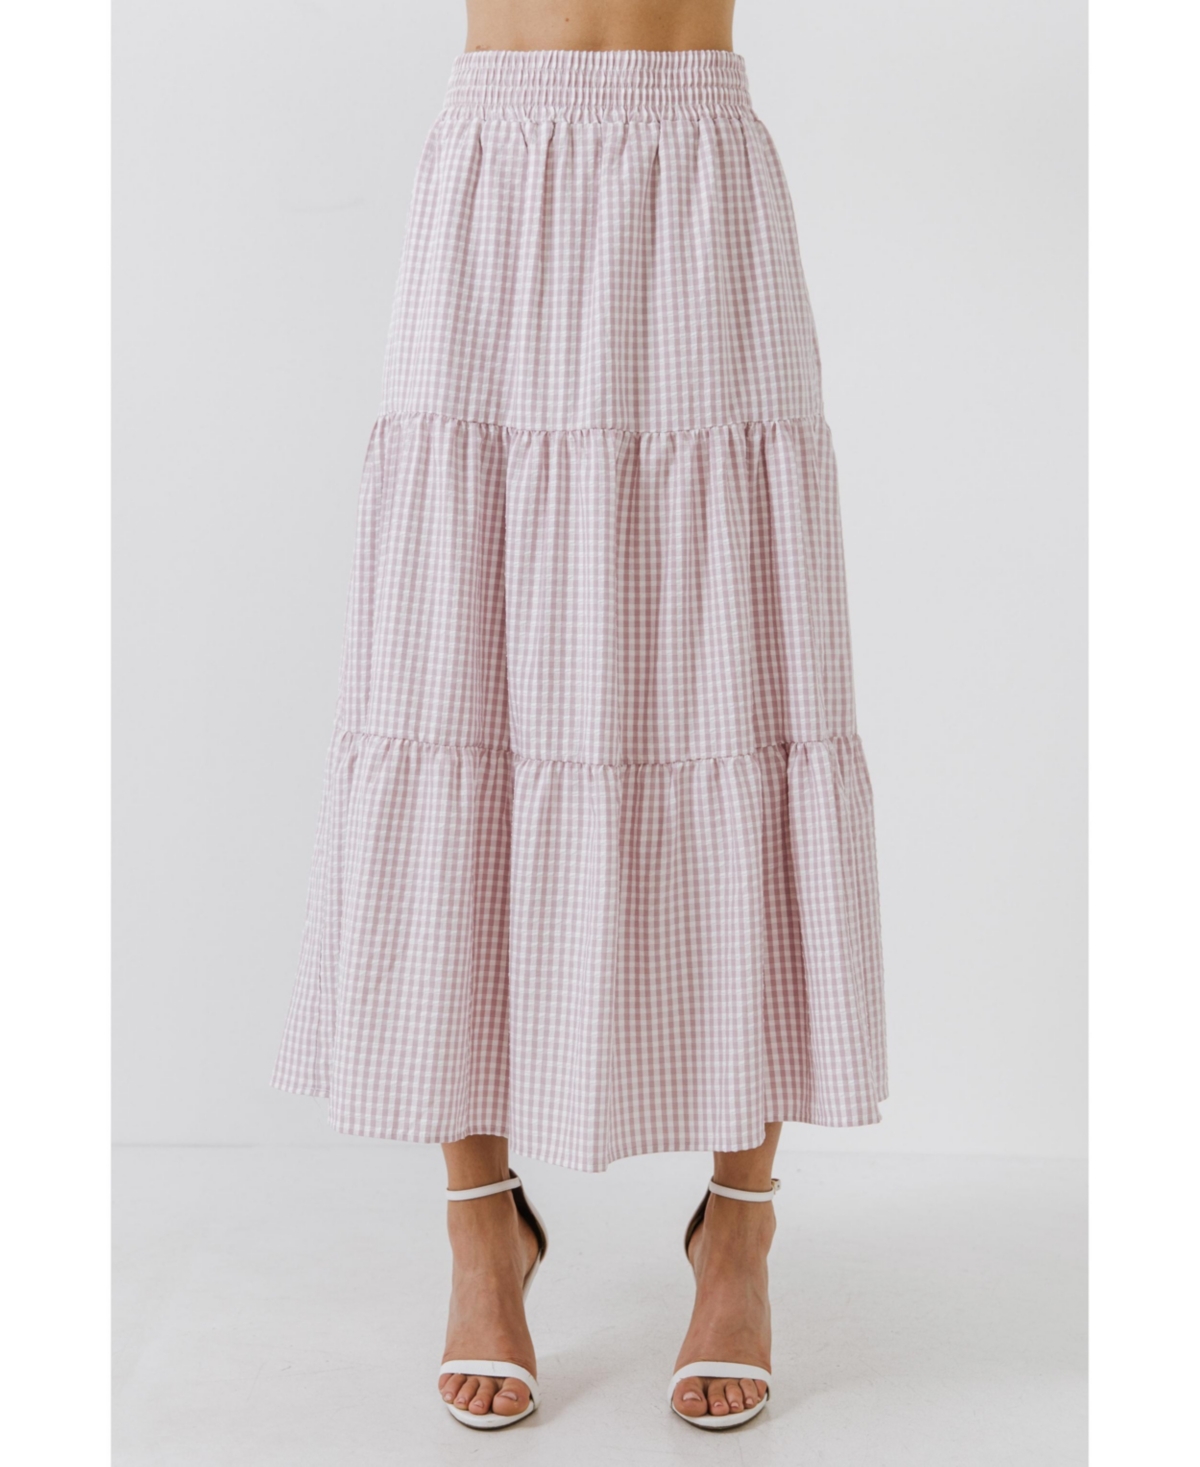 Women's Tiered Maxi Skirt - Dusty rose